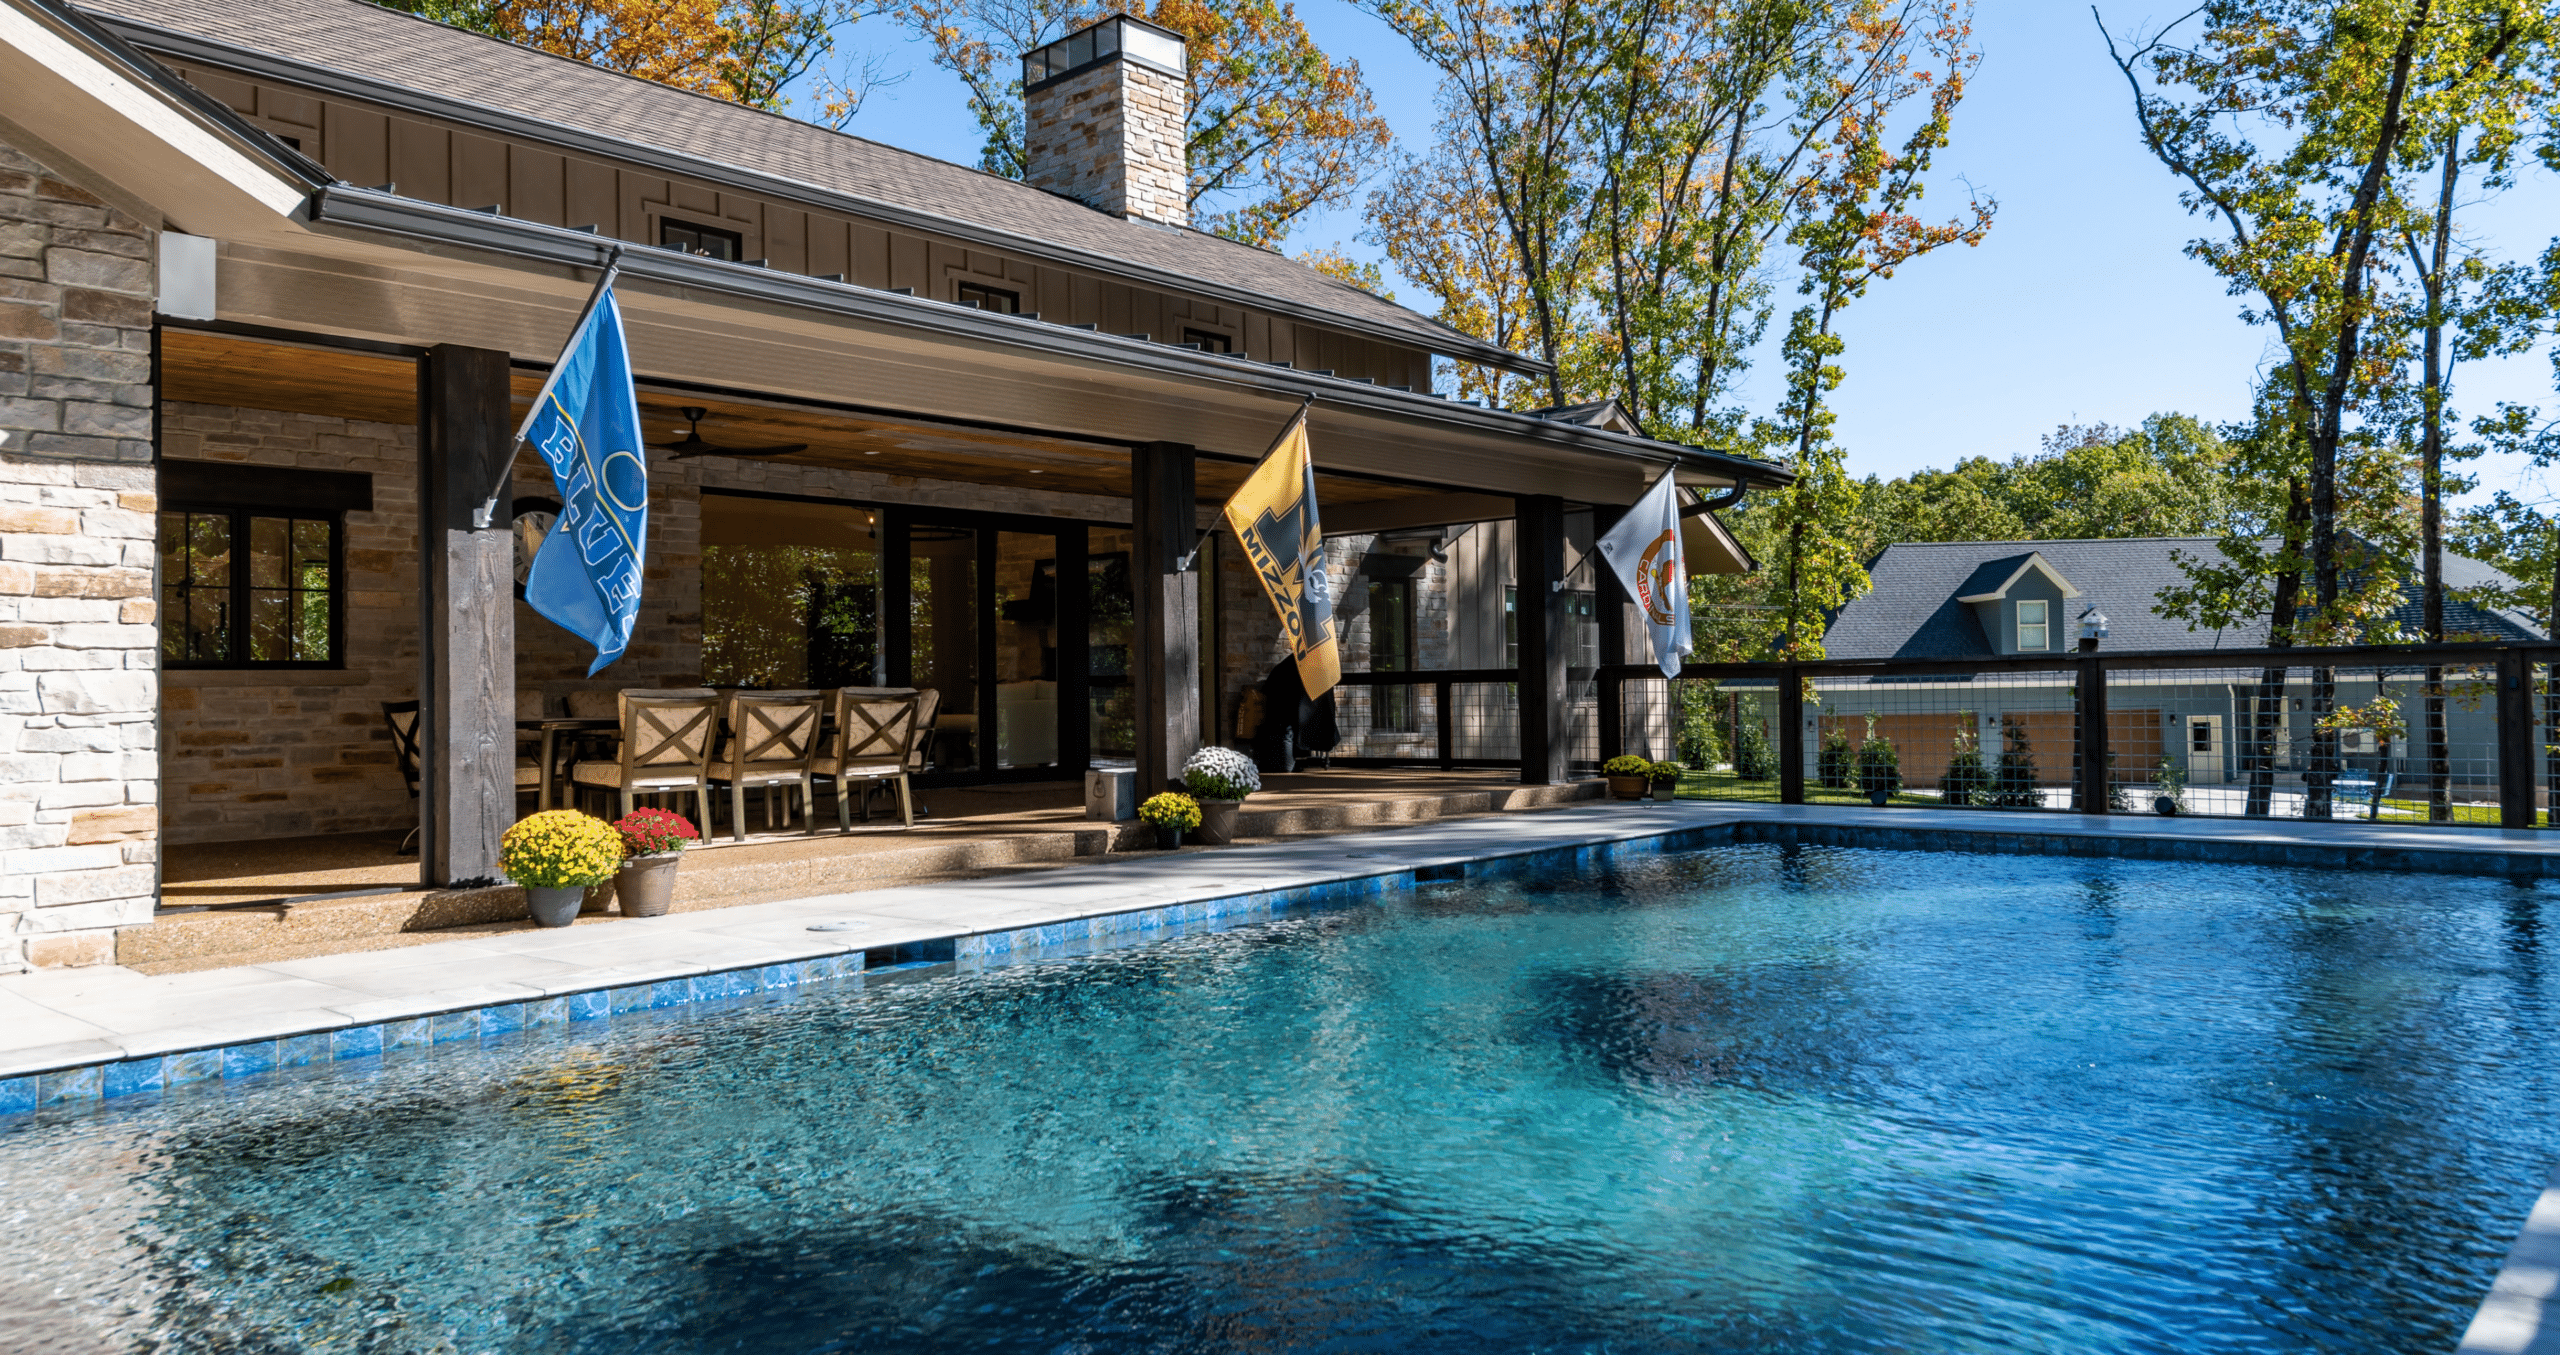 Pool and Outdoor Entertaining Area